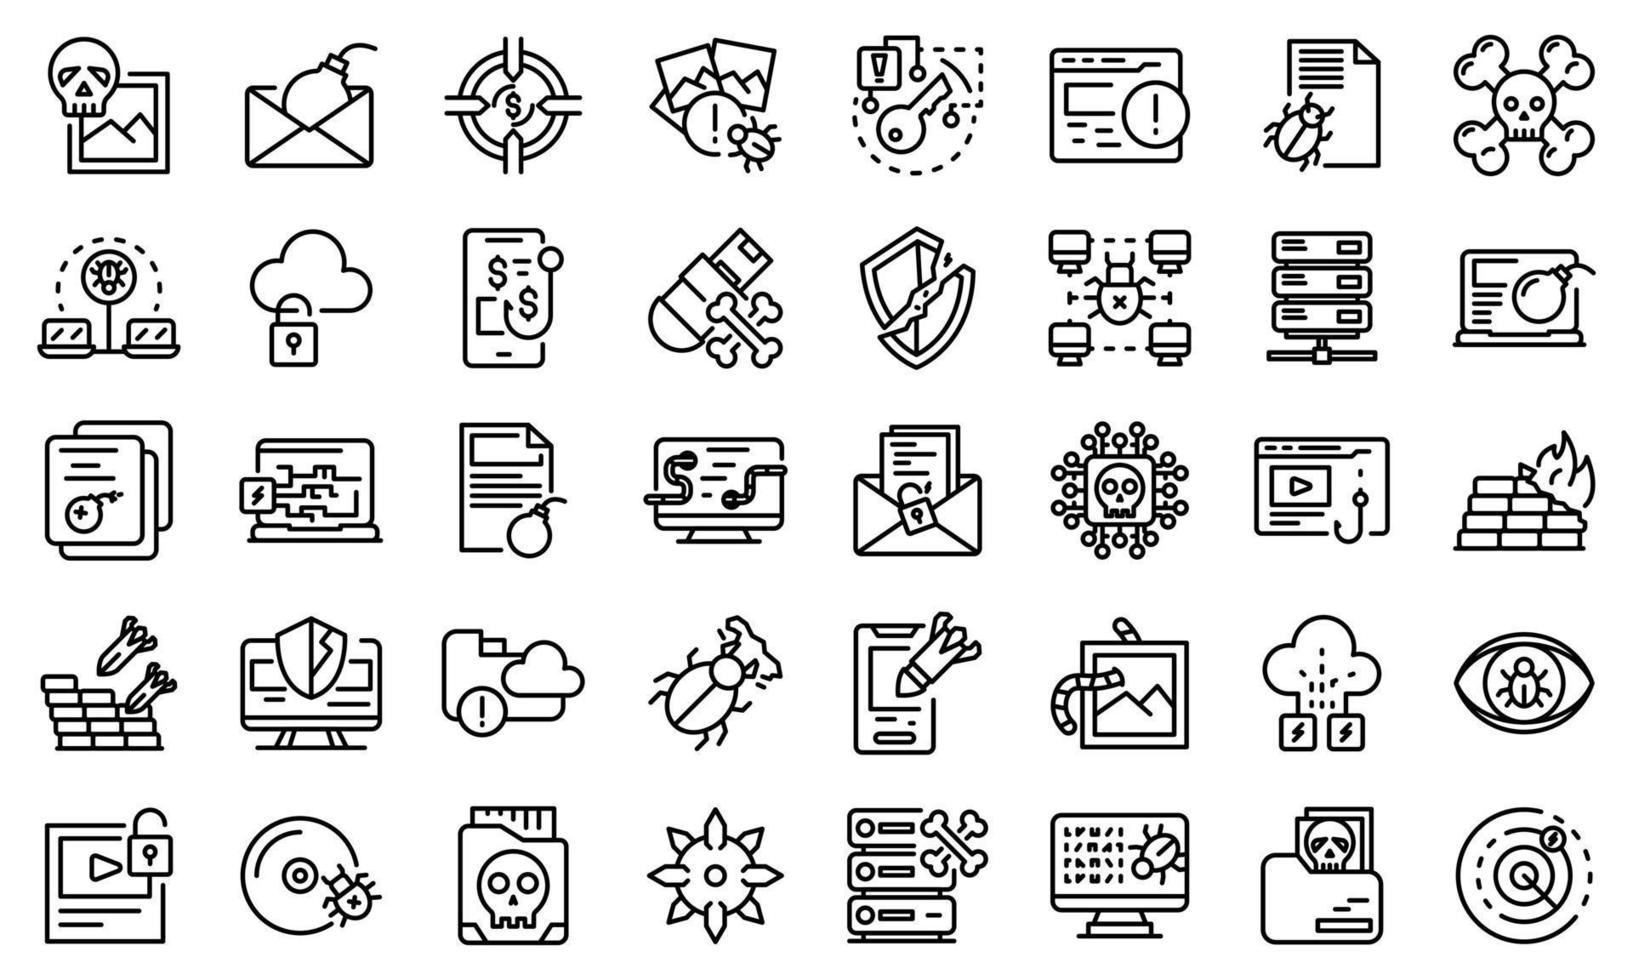 Malware icons set, outline style vector